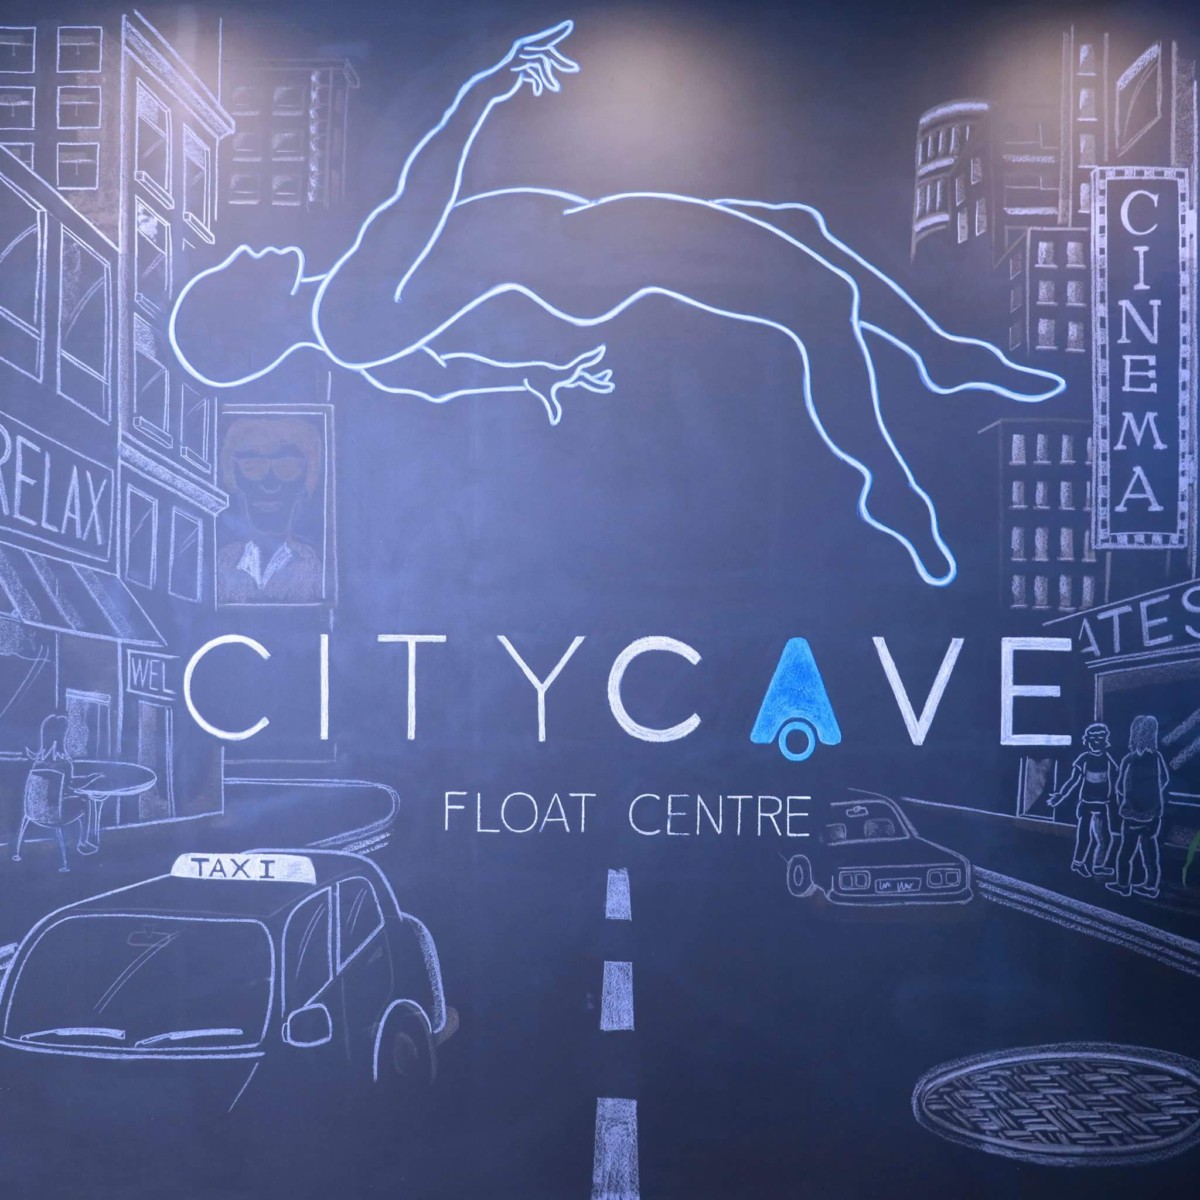 City Cave: Revolutionizing wellness with float therapy